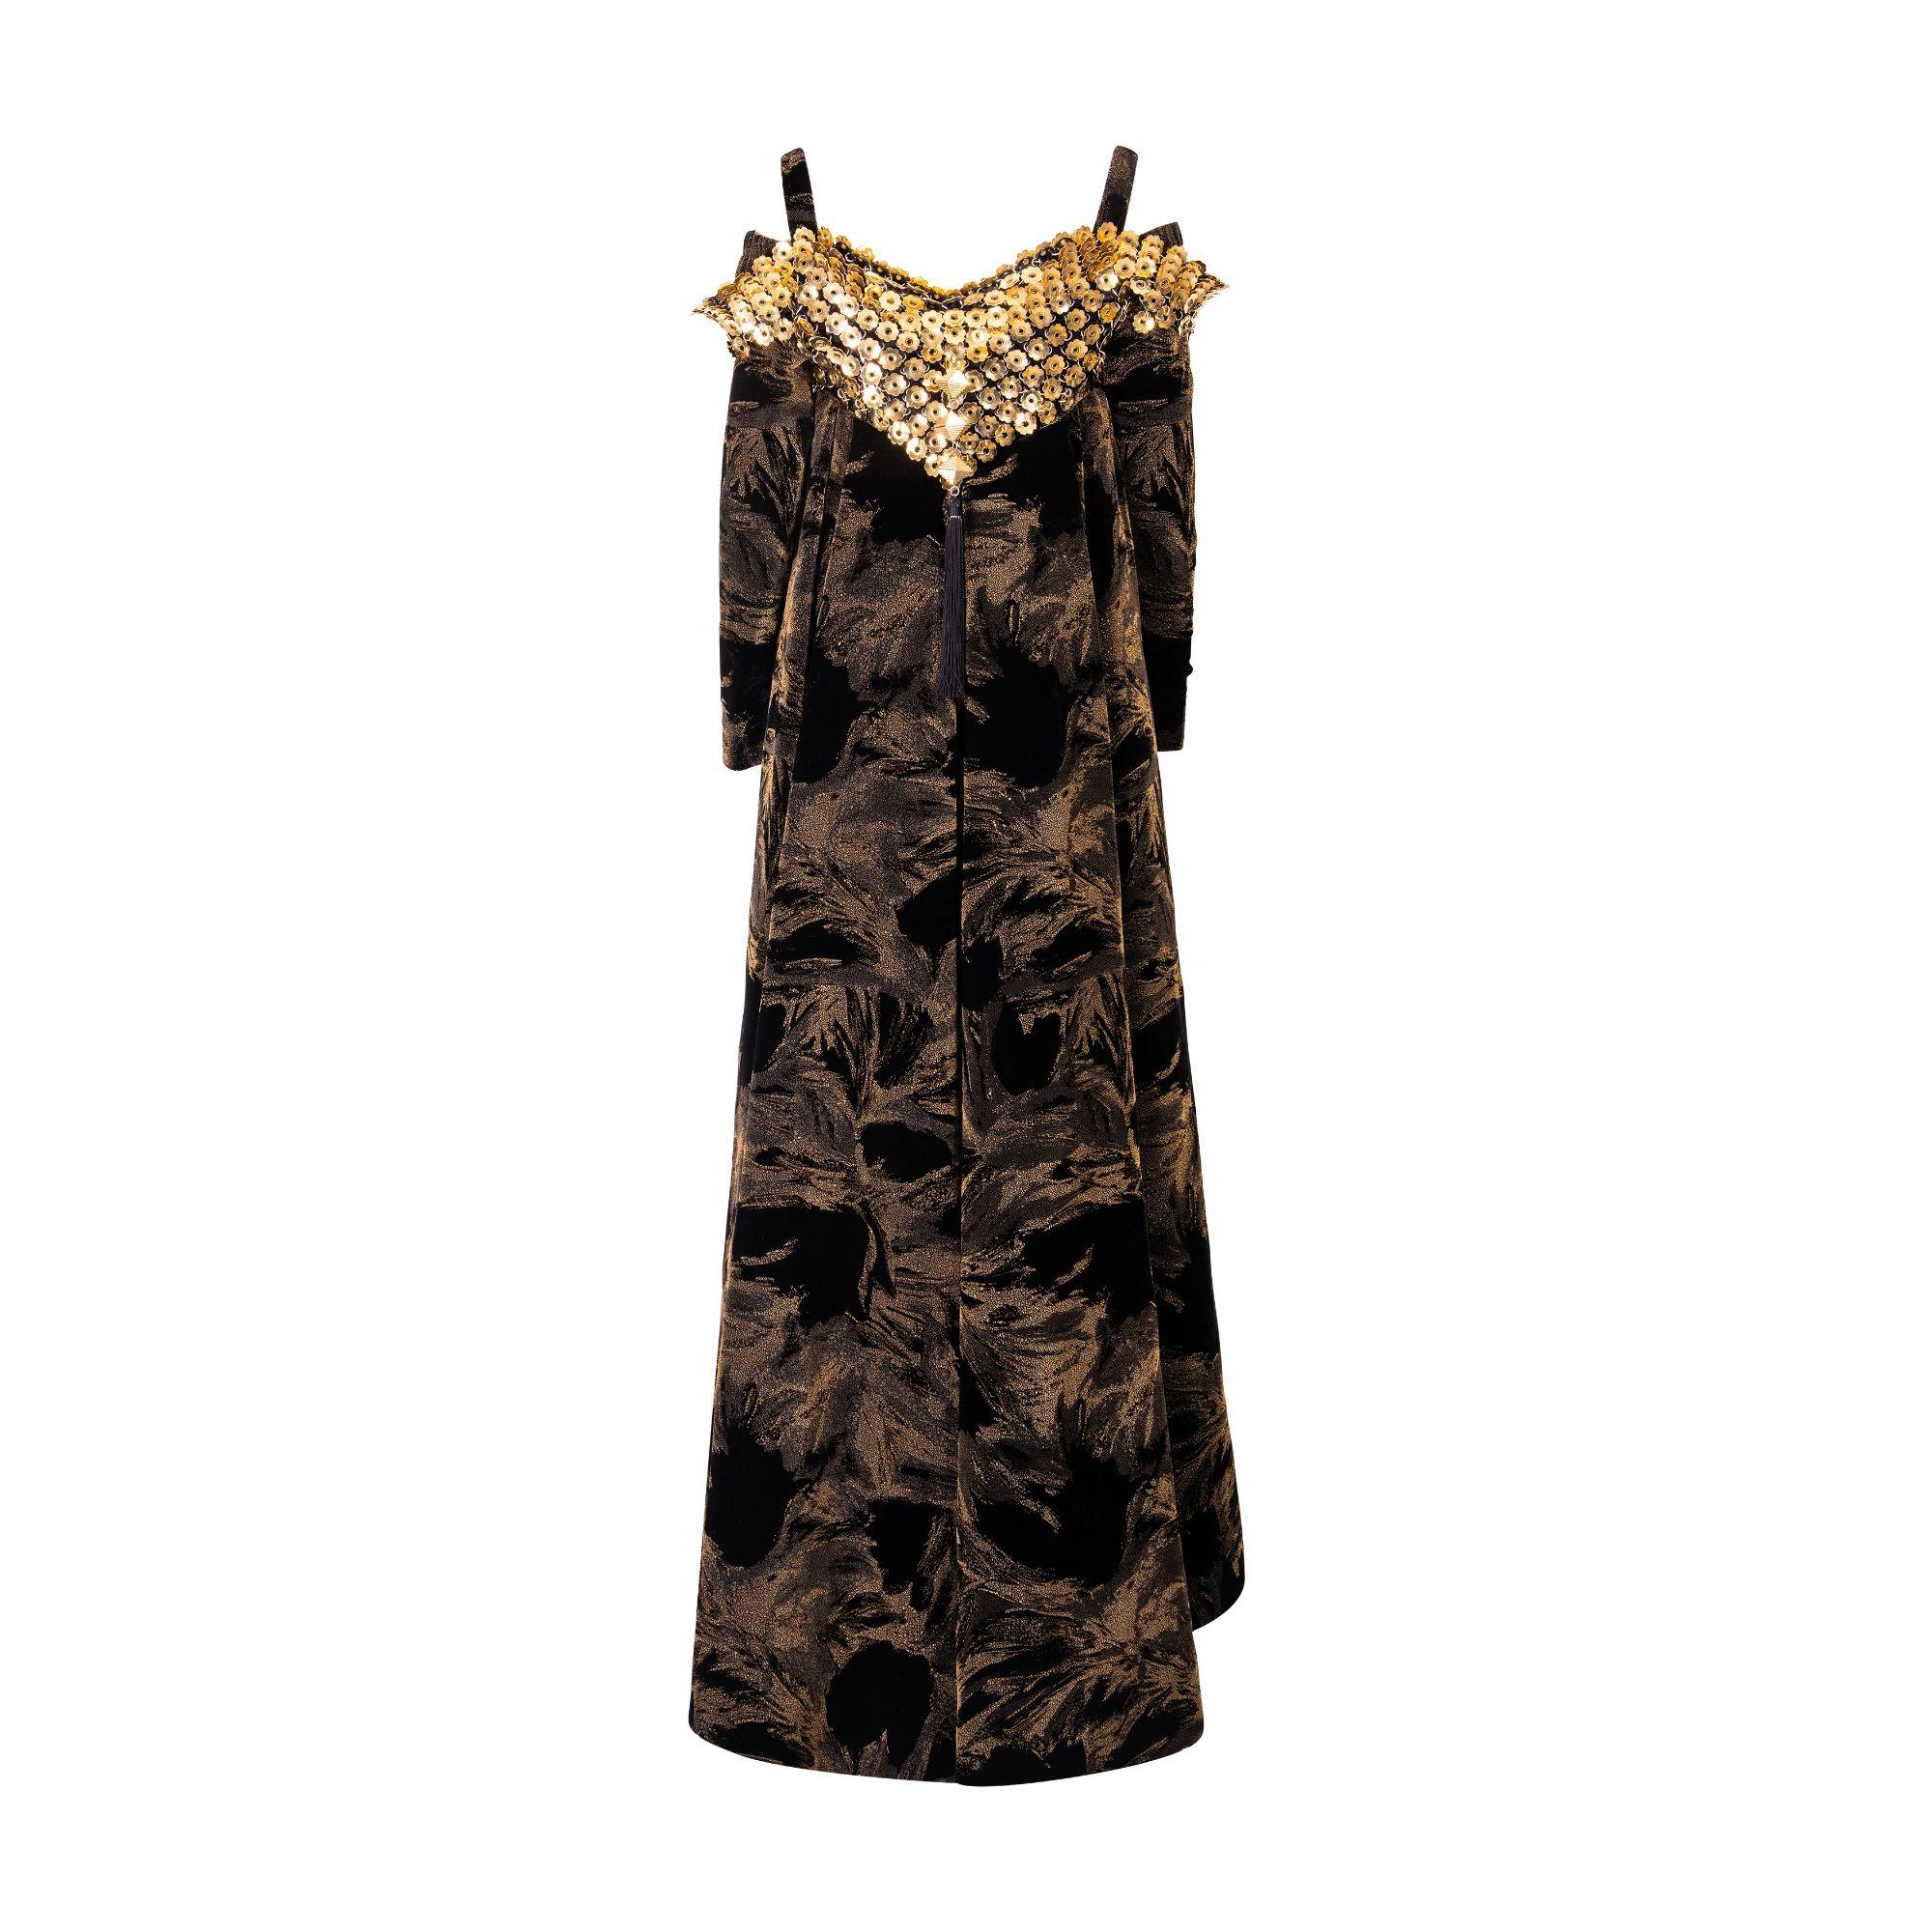 A/W 1988 Paco Rabanne Haute Couture Gold Chainmail Bustier Gown In Good Condition For Sale In North Hollywood, CA